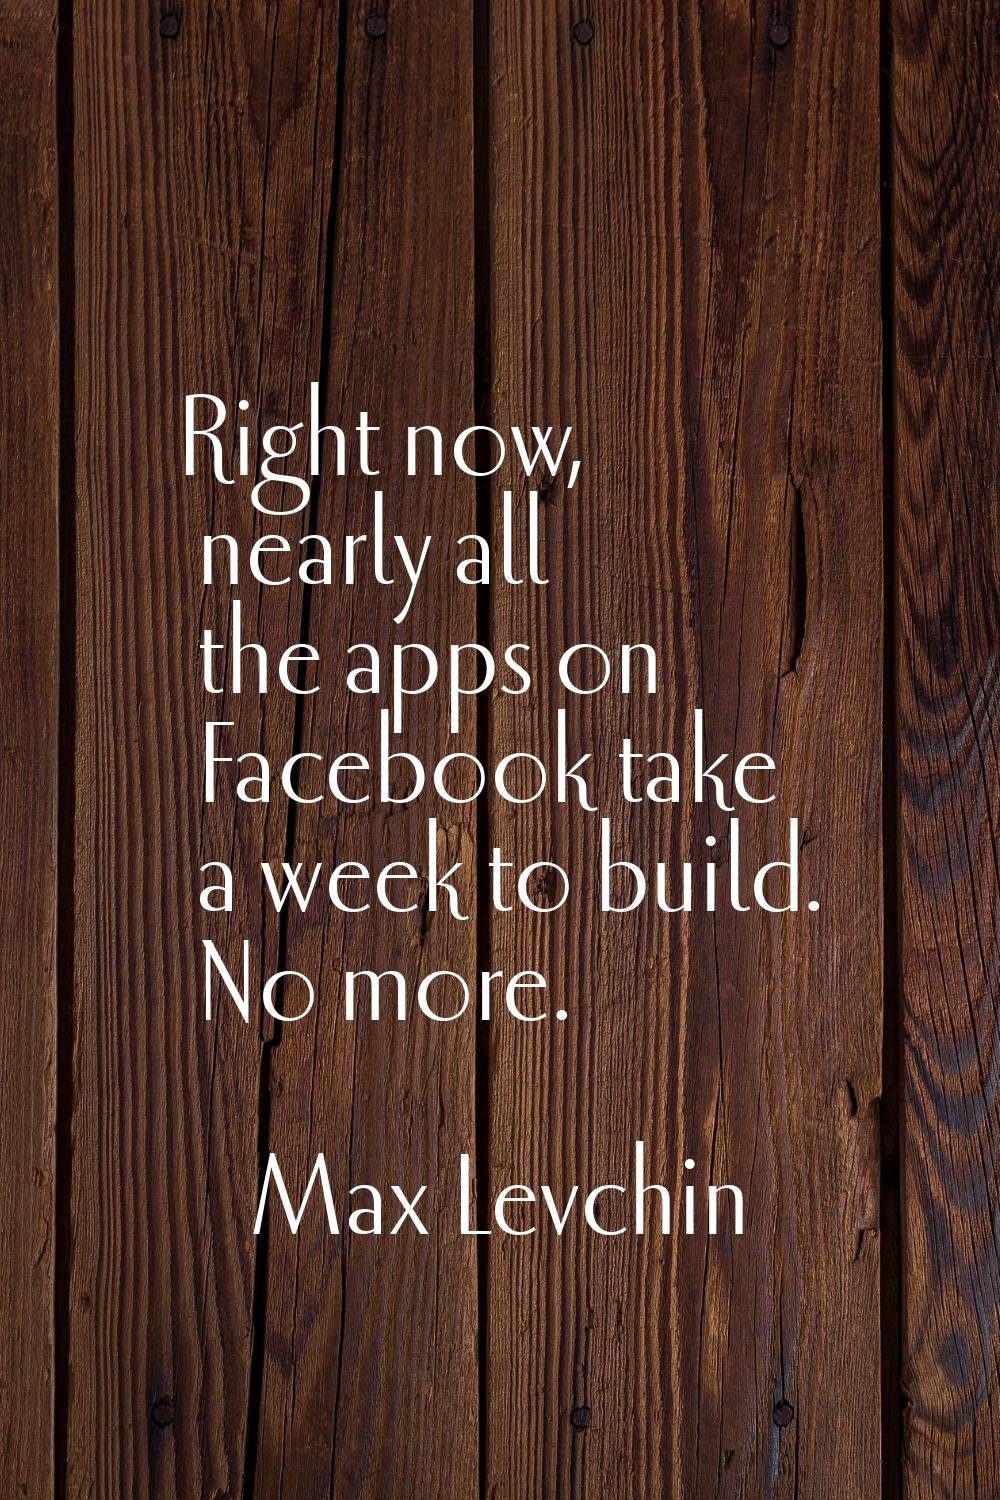 Right now, nearly all the apps on Facebook take a week to build. No more.